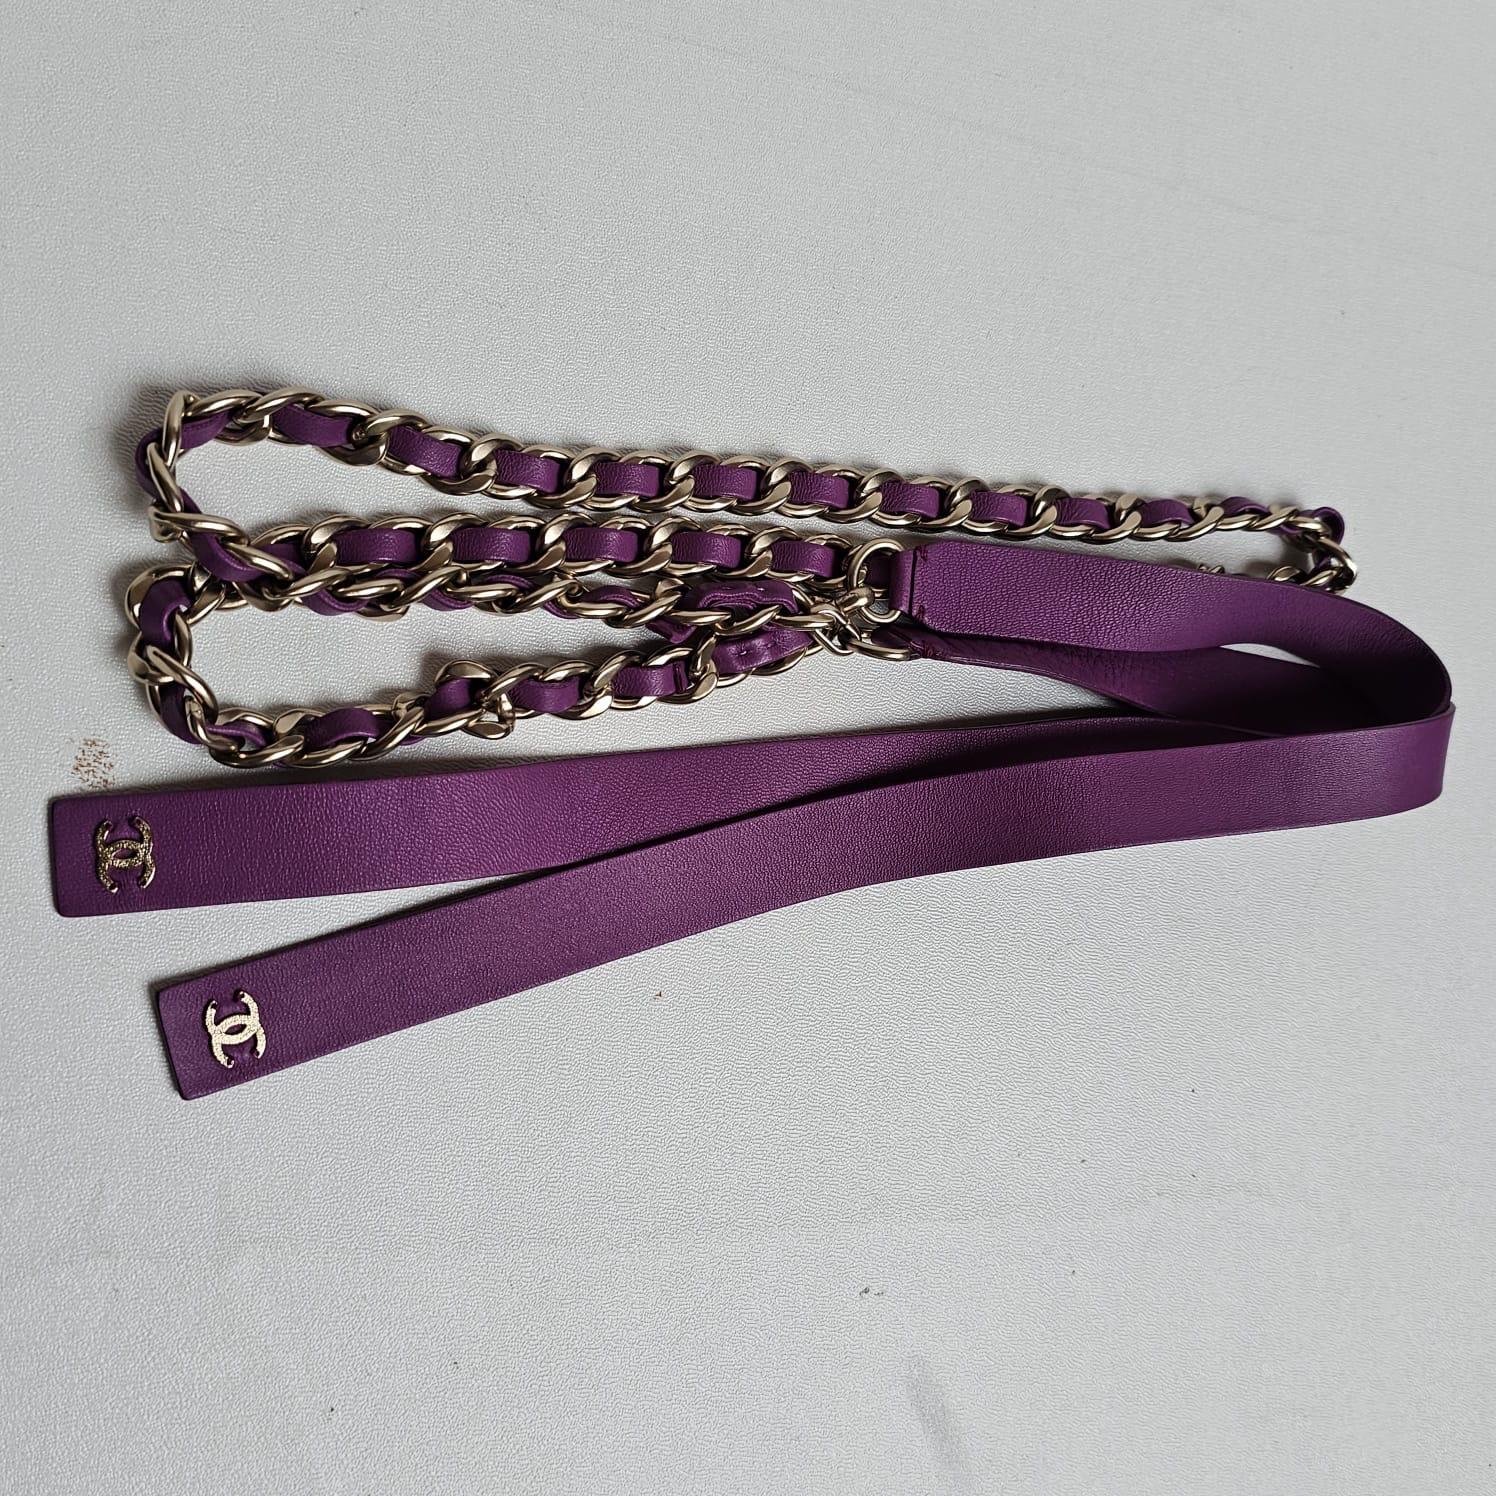 Beautiful chain waist belt in purple. Light gold hardware. From recent collection. Overall in very lightly worn condition, with very faint scuffs on the leather. Length is 85 cm. Comes with dust bag.